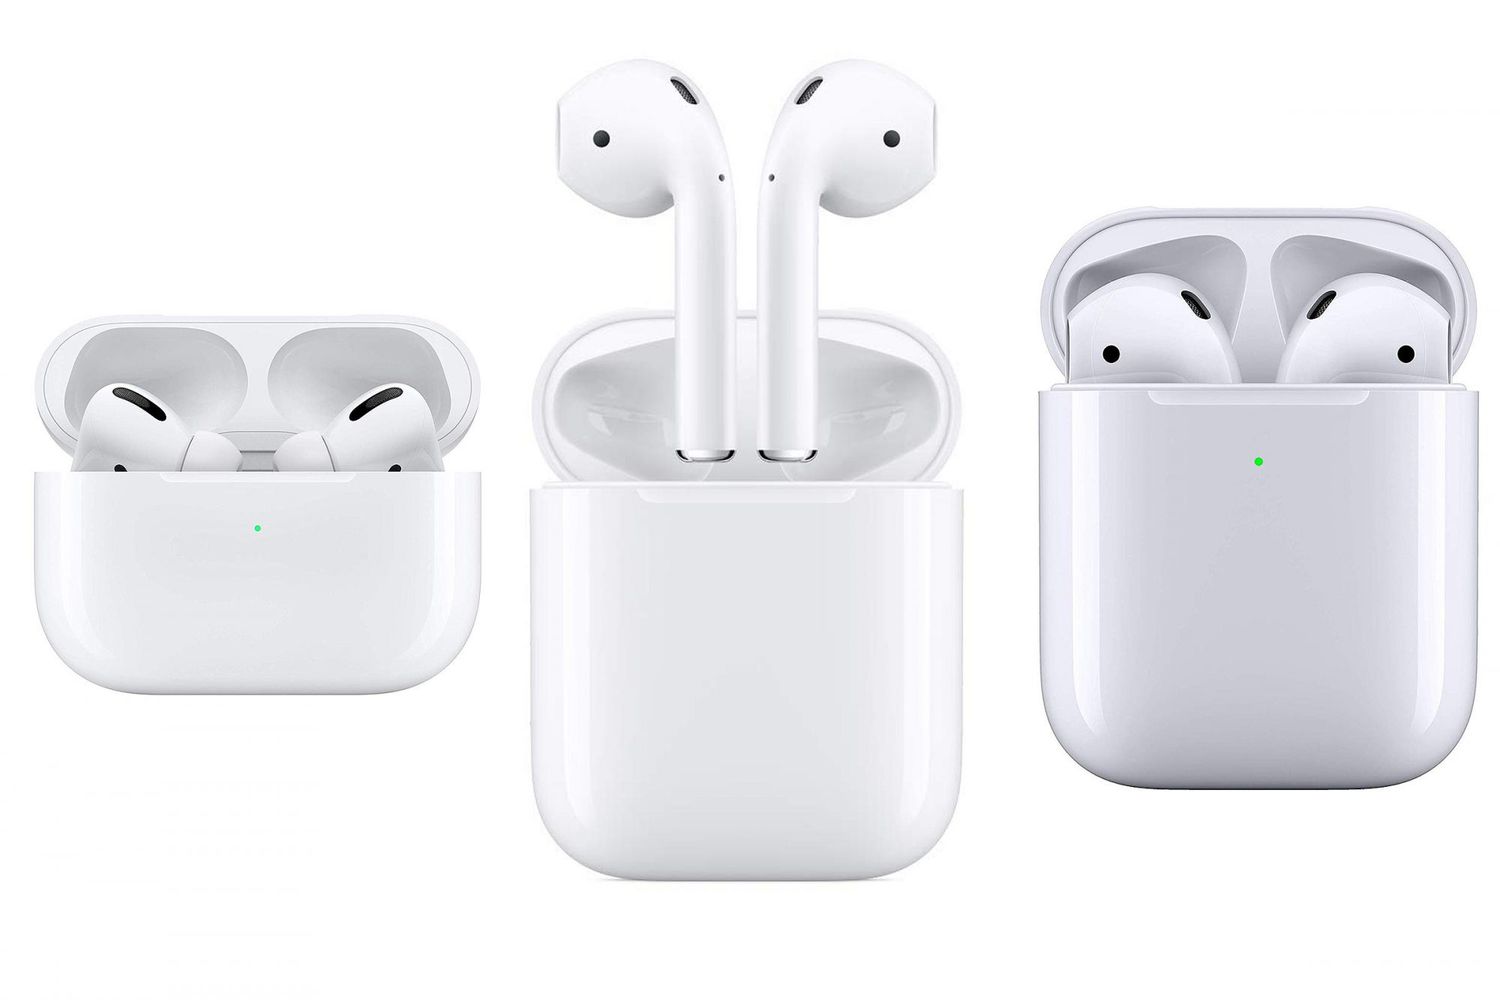 Shop Apple AirPods Black Friday Sales and Deals 2019 | PEOPLE.com - What Price Will Airpods Be On Black Friday